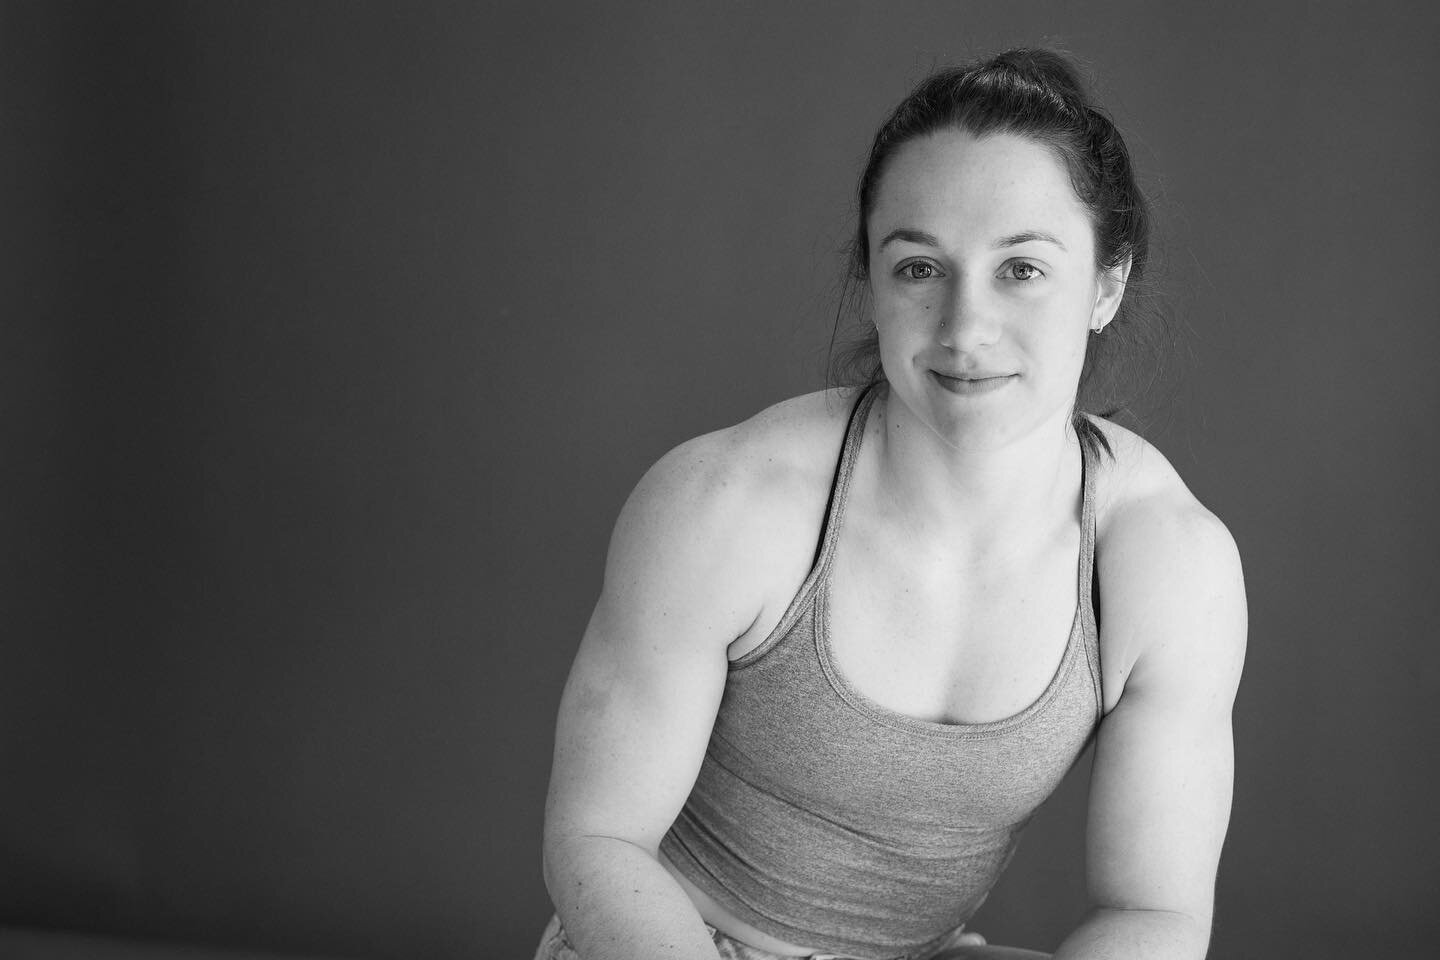 Meet Gabby Ocker. Head Coach at Solidarity CrossFit. 

&ldquo;Strong back, soft front, wild heart&rdquo; - Brene Brown

#badasswomenofcharlottesville @solidaritycrossfit @gabocker94

Thank you for all that you do for our community here in Charlottesv